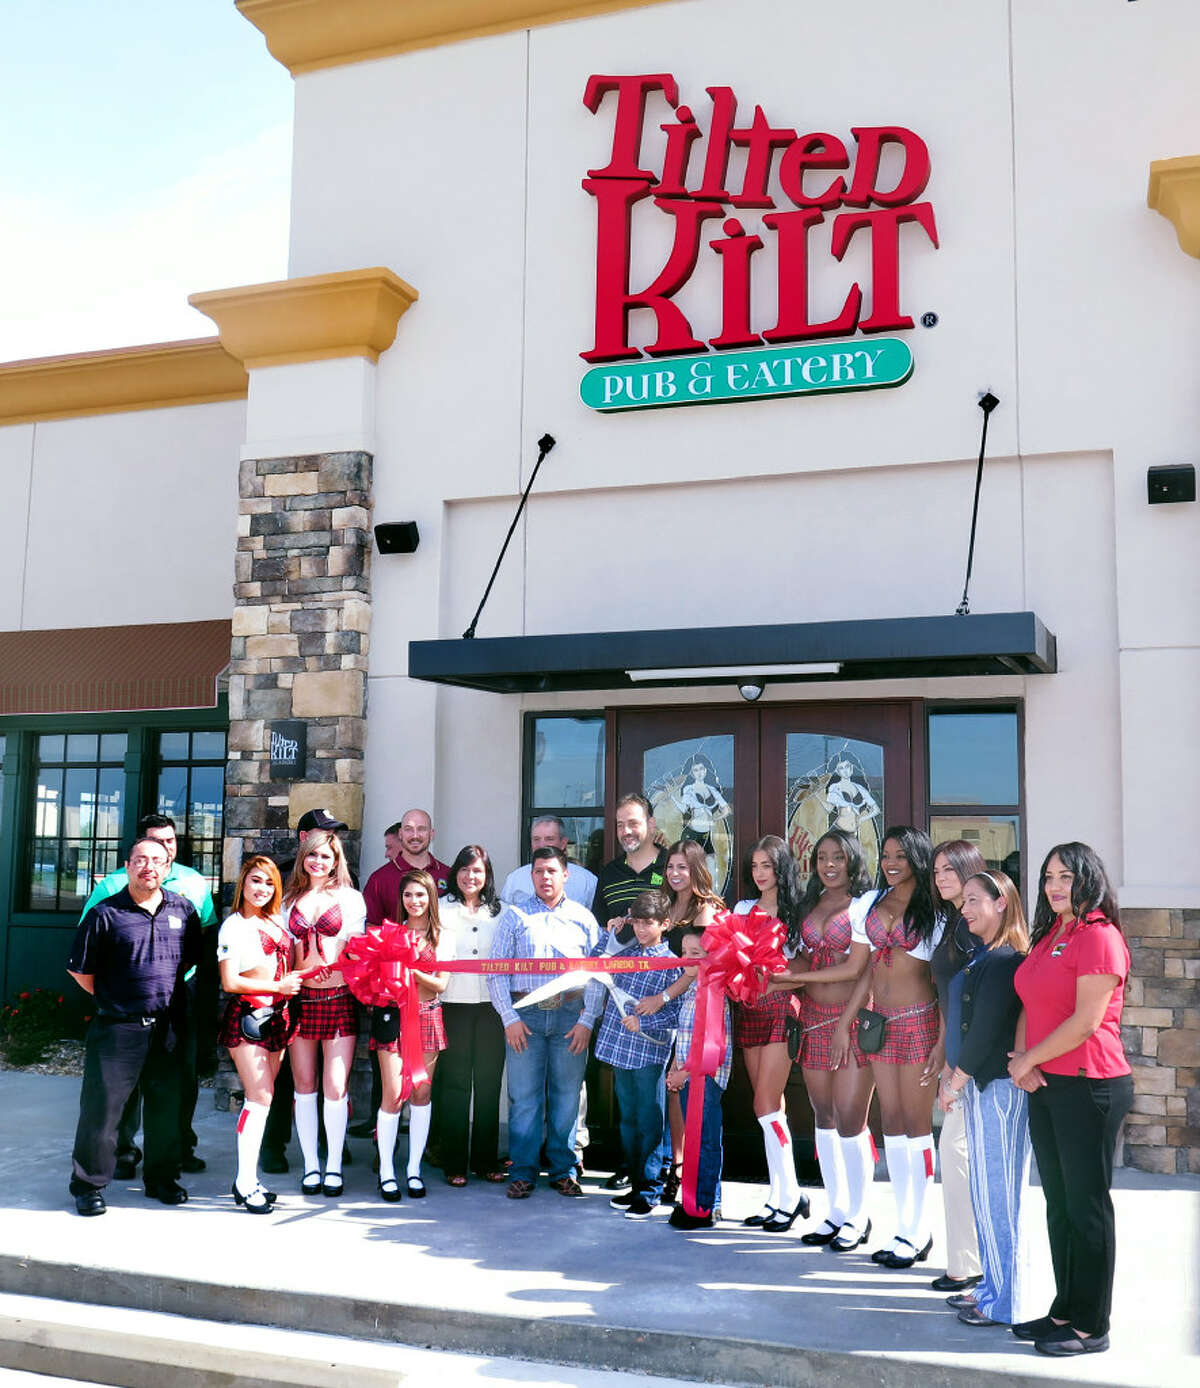 The Tilted Kilt, located at 2414 Jacaman Road, held a ribbon cutting ceremony Monday.